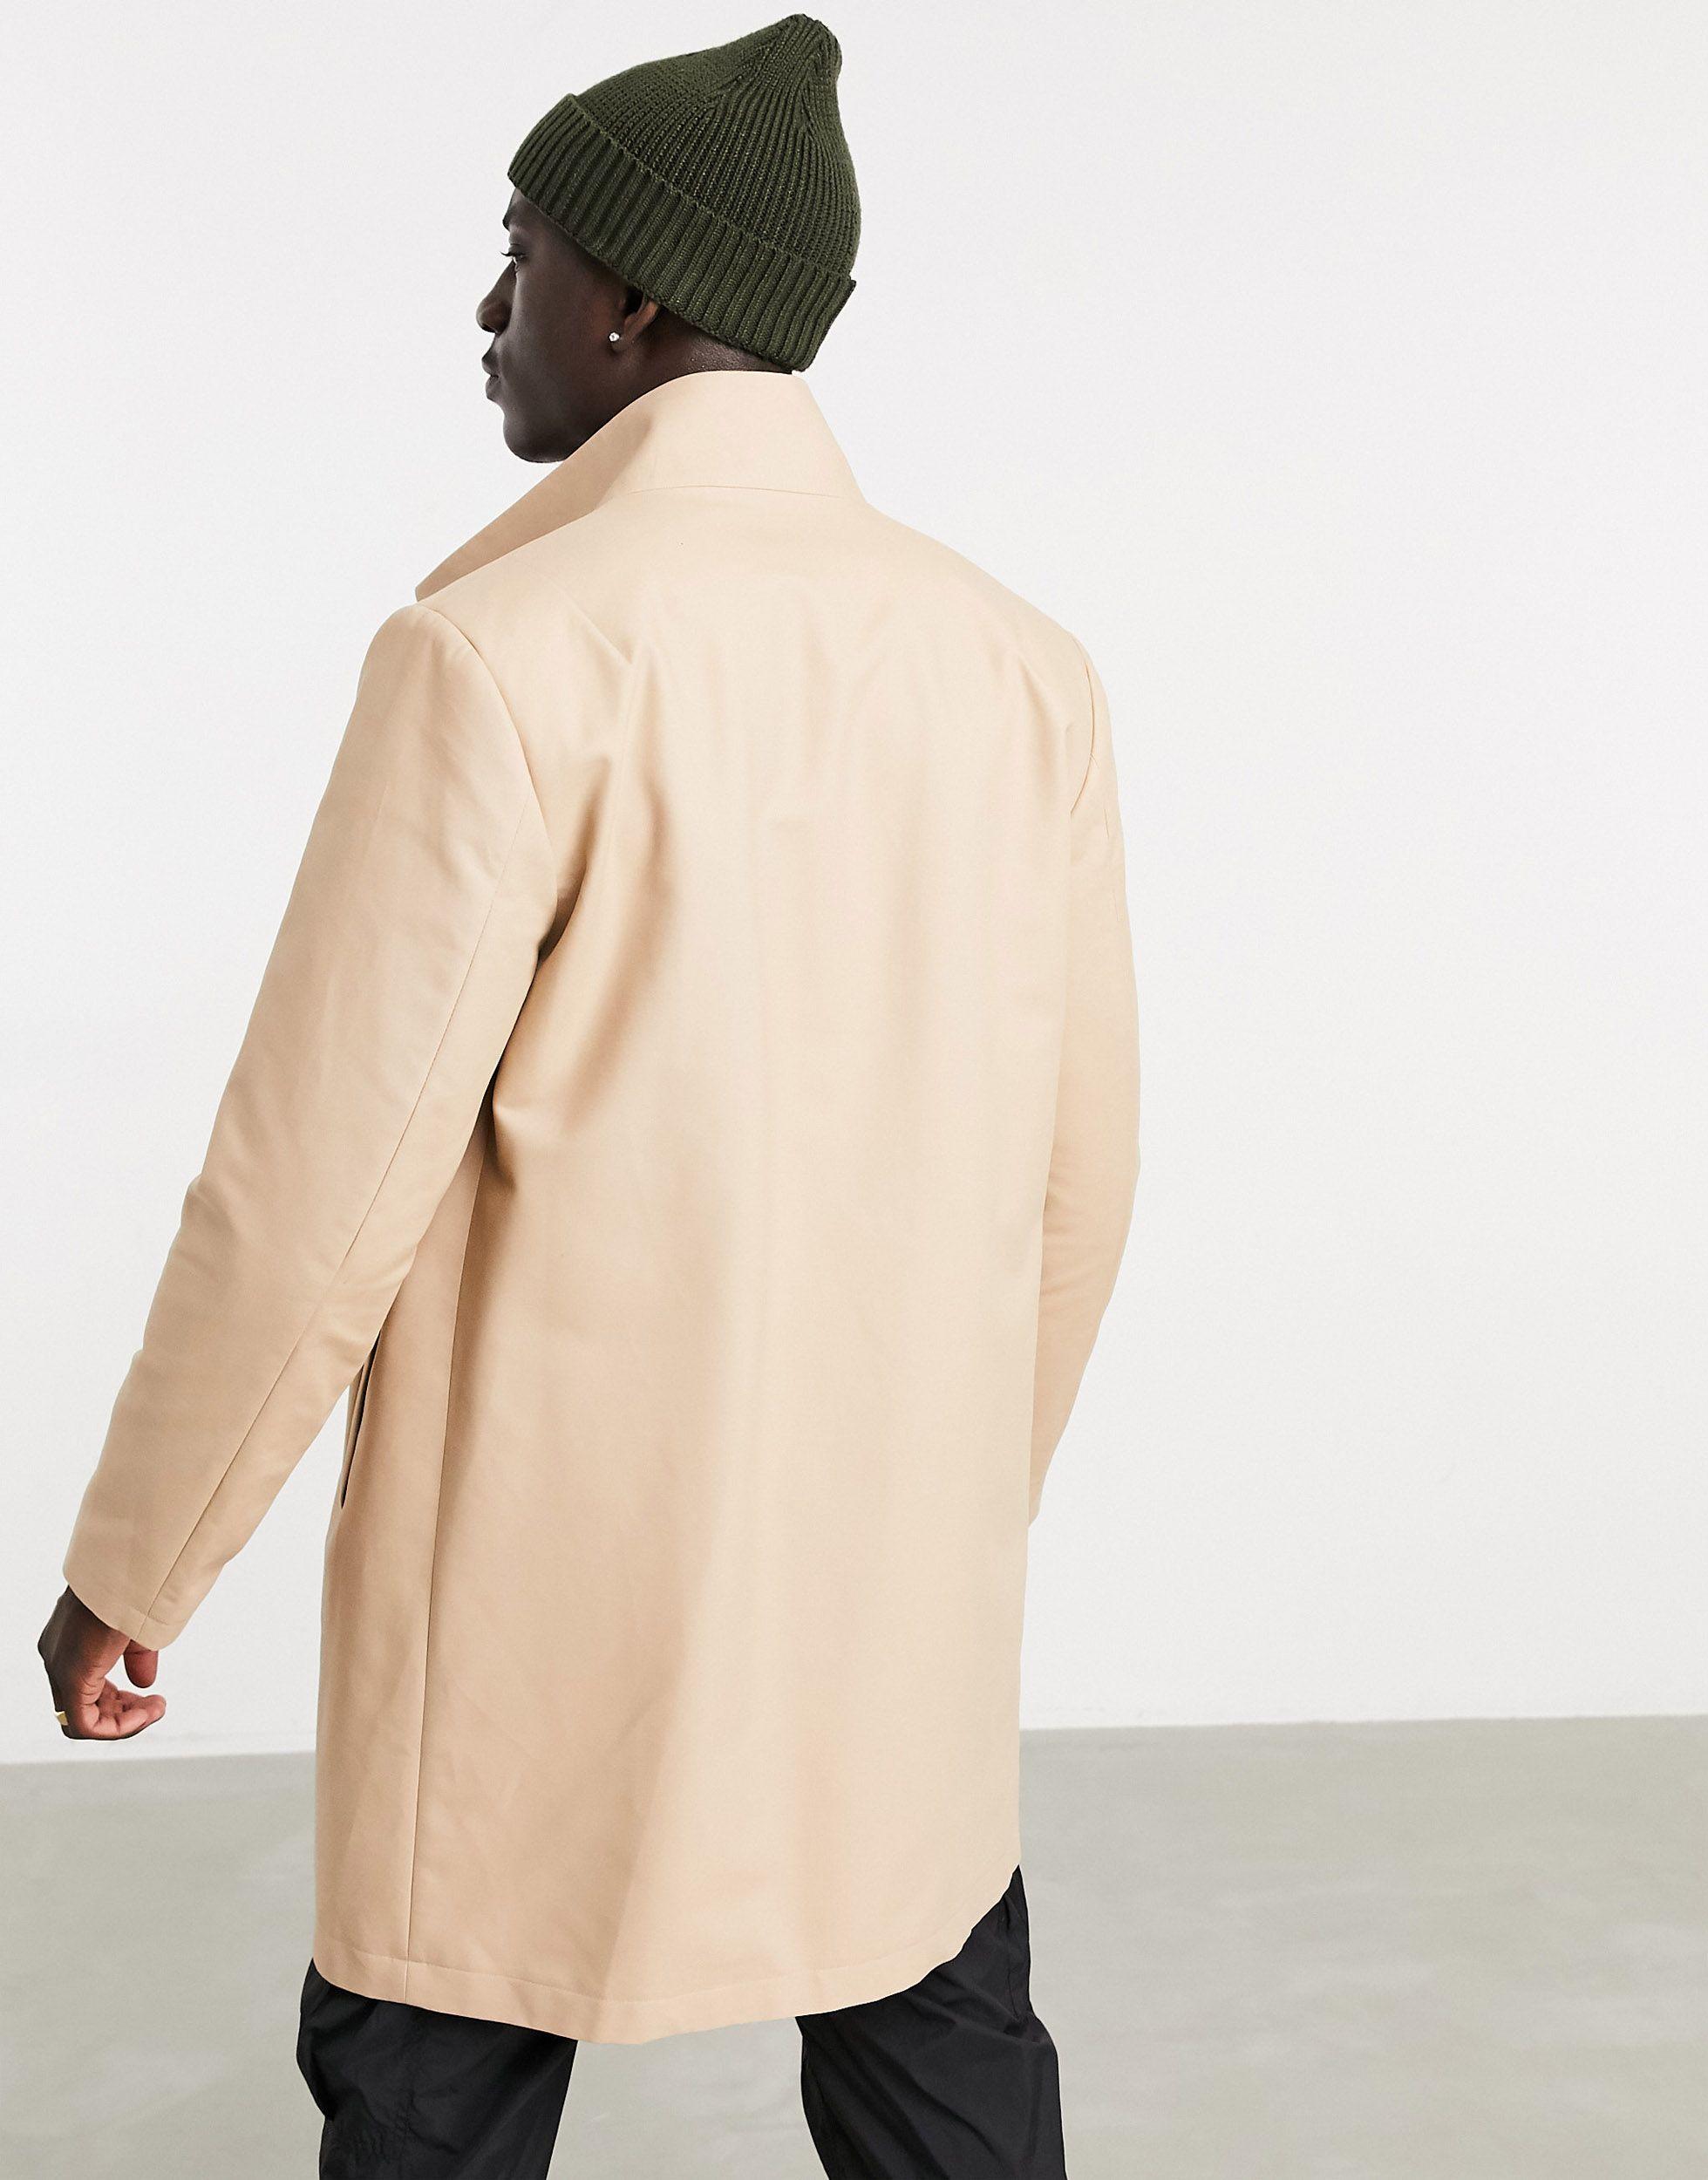 ASOS Trench Coat With Funnel Neck in Beige (Natural) for Men - Lyst